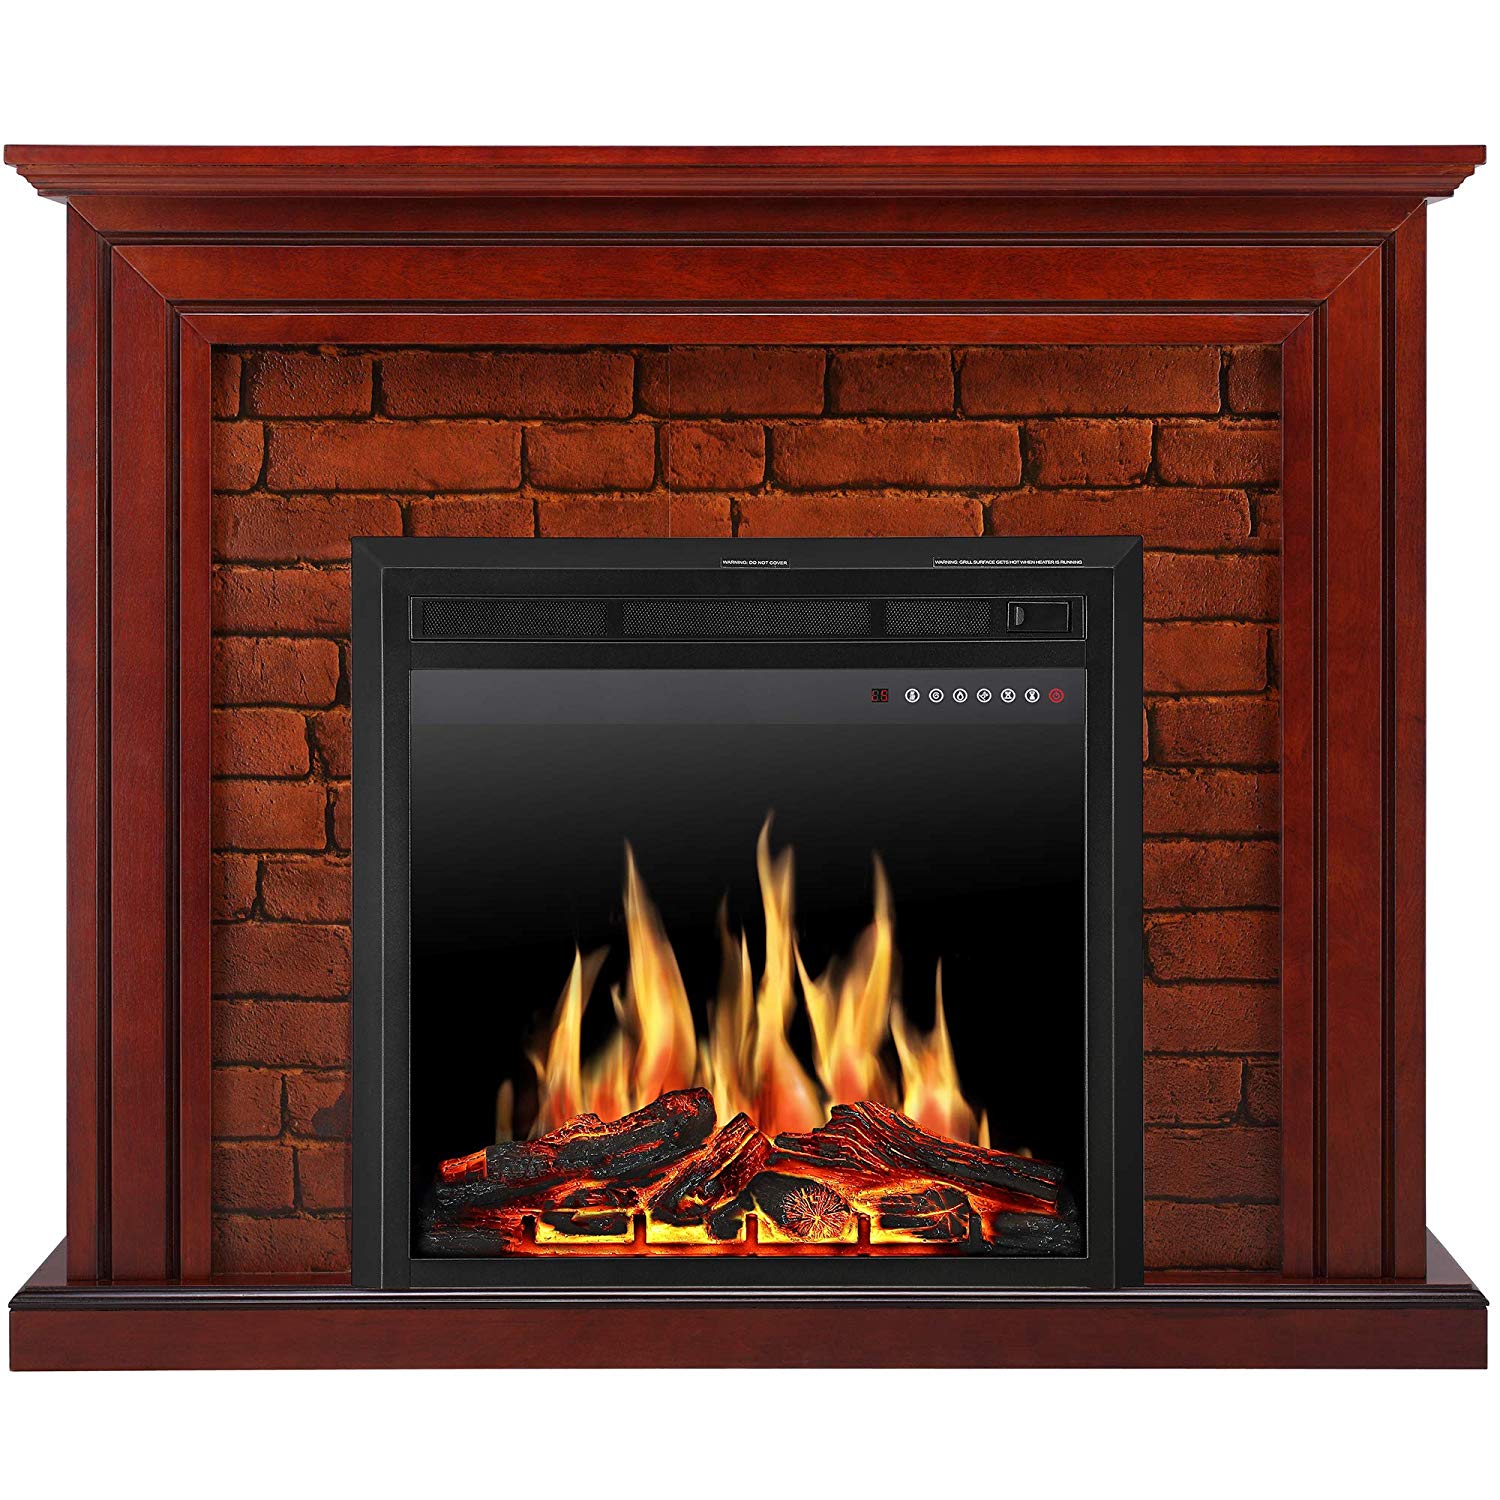 Brick Fireplace Designs Ideas Inspirational Jamfly Electric Fireplace Mantel Package Traditional Brick Wall Design Heater with Remote Control and Led touch Screen Home Accent Furnishings